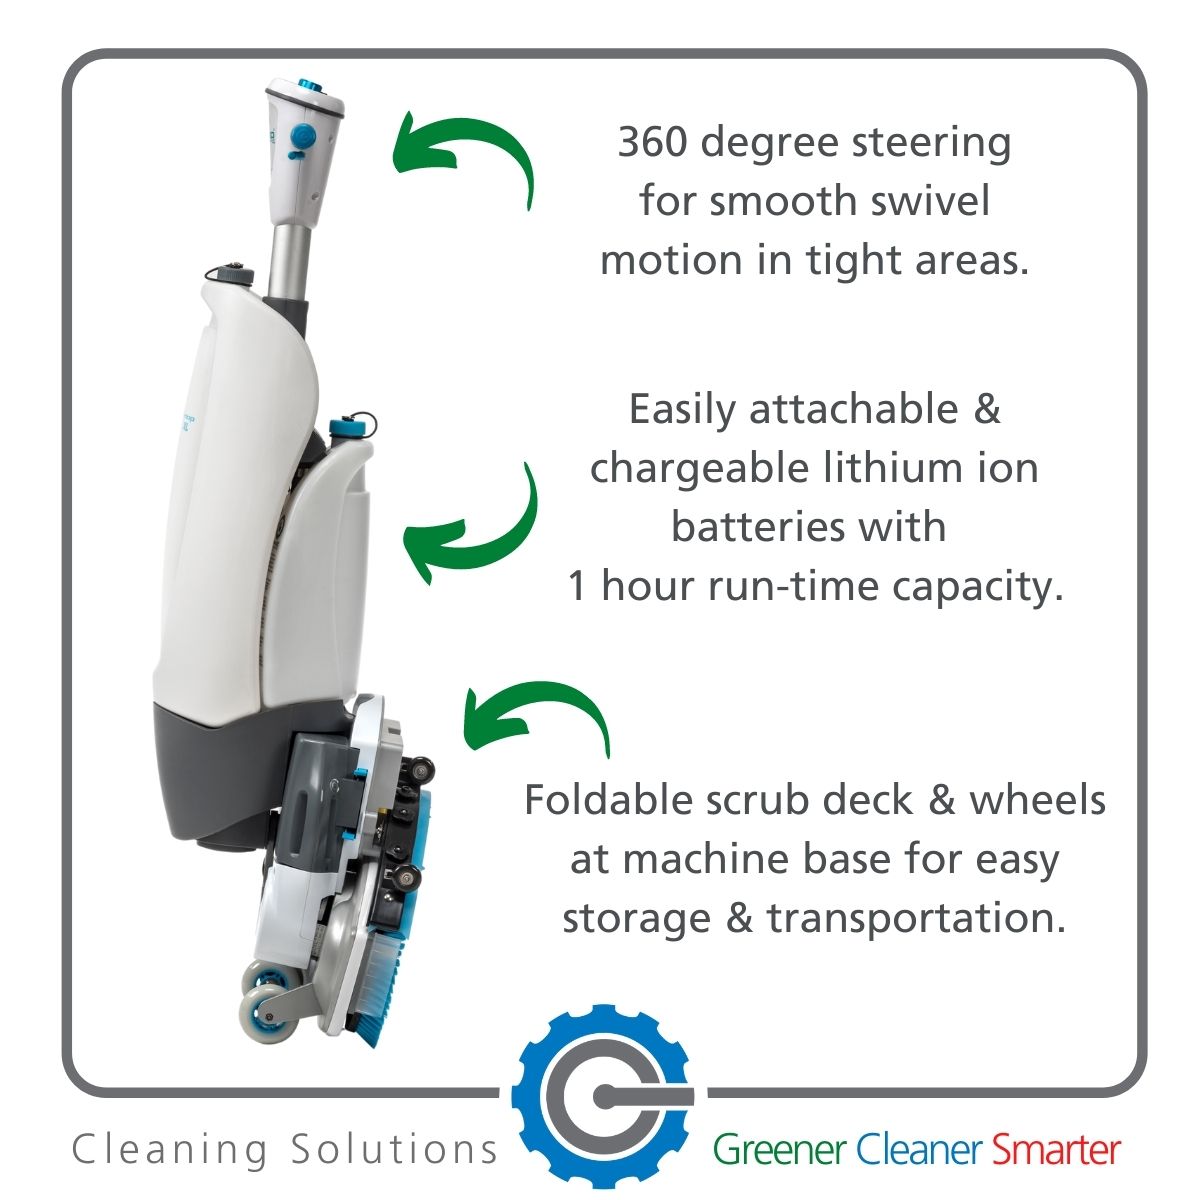 i-mop product features #1 - 360 degree steering, lithium ion batteries & foldable scrub deck